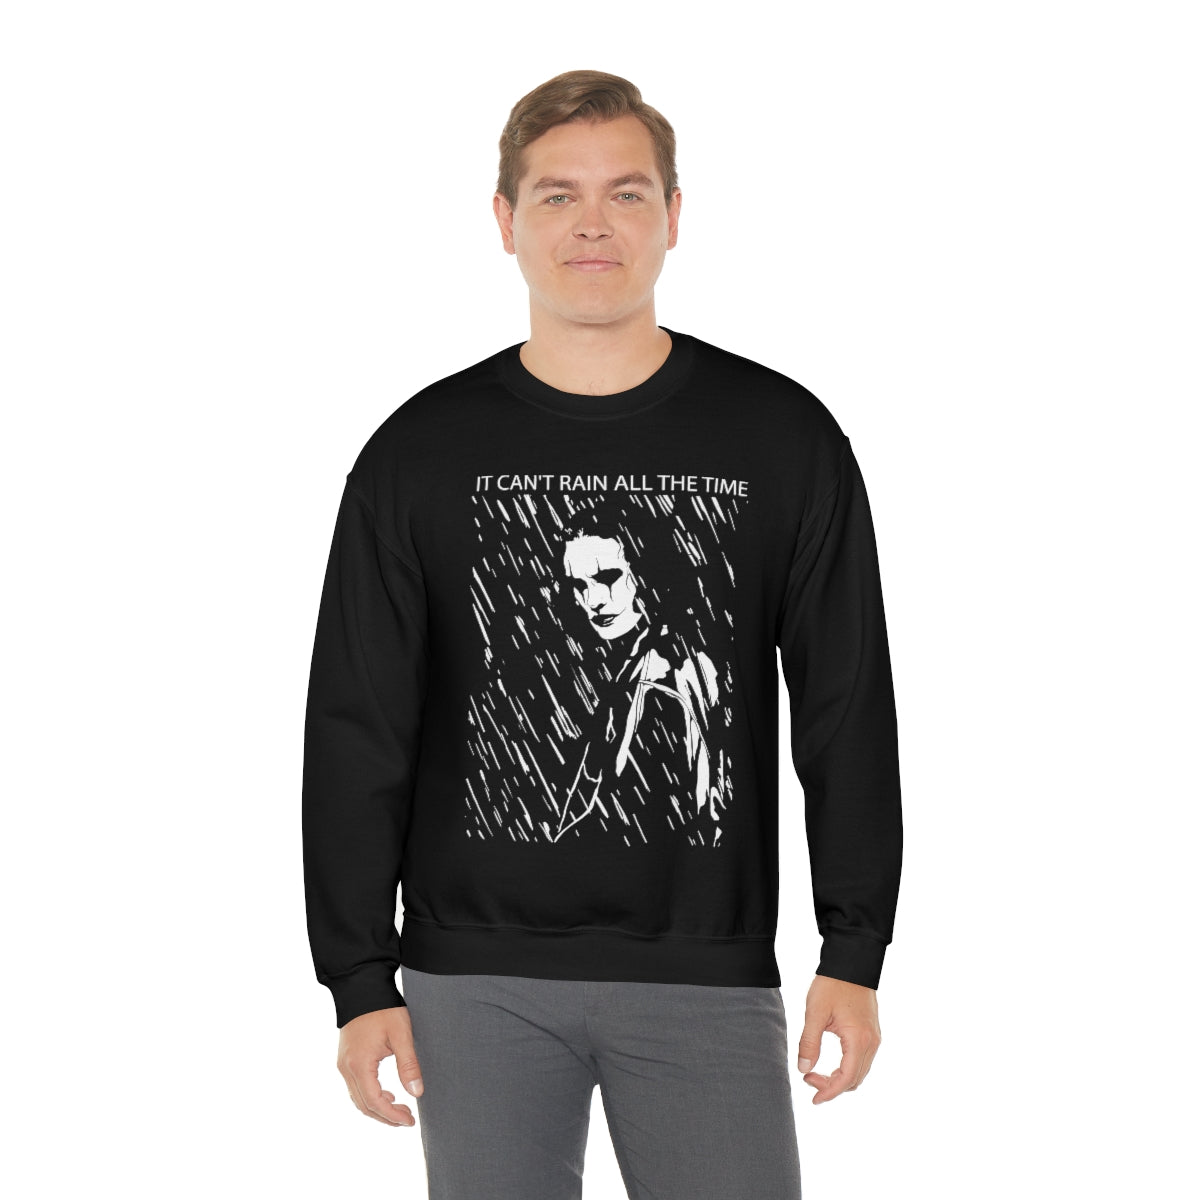 The Crow - It Can't Rain All the Time Sweatshirt